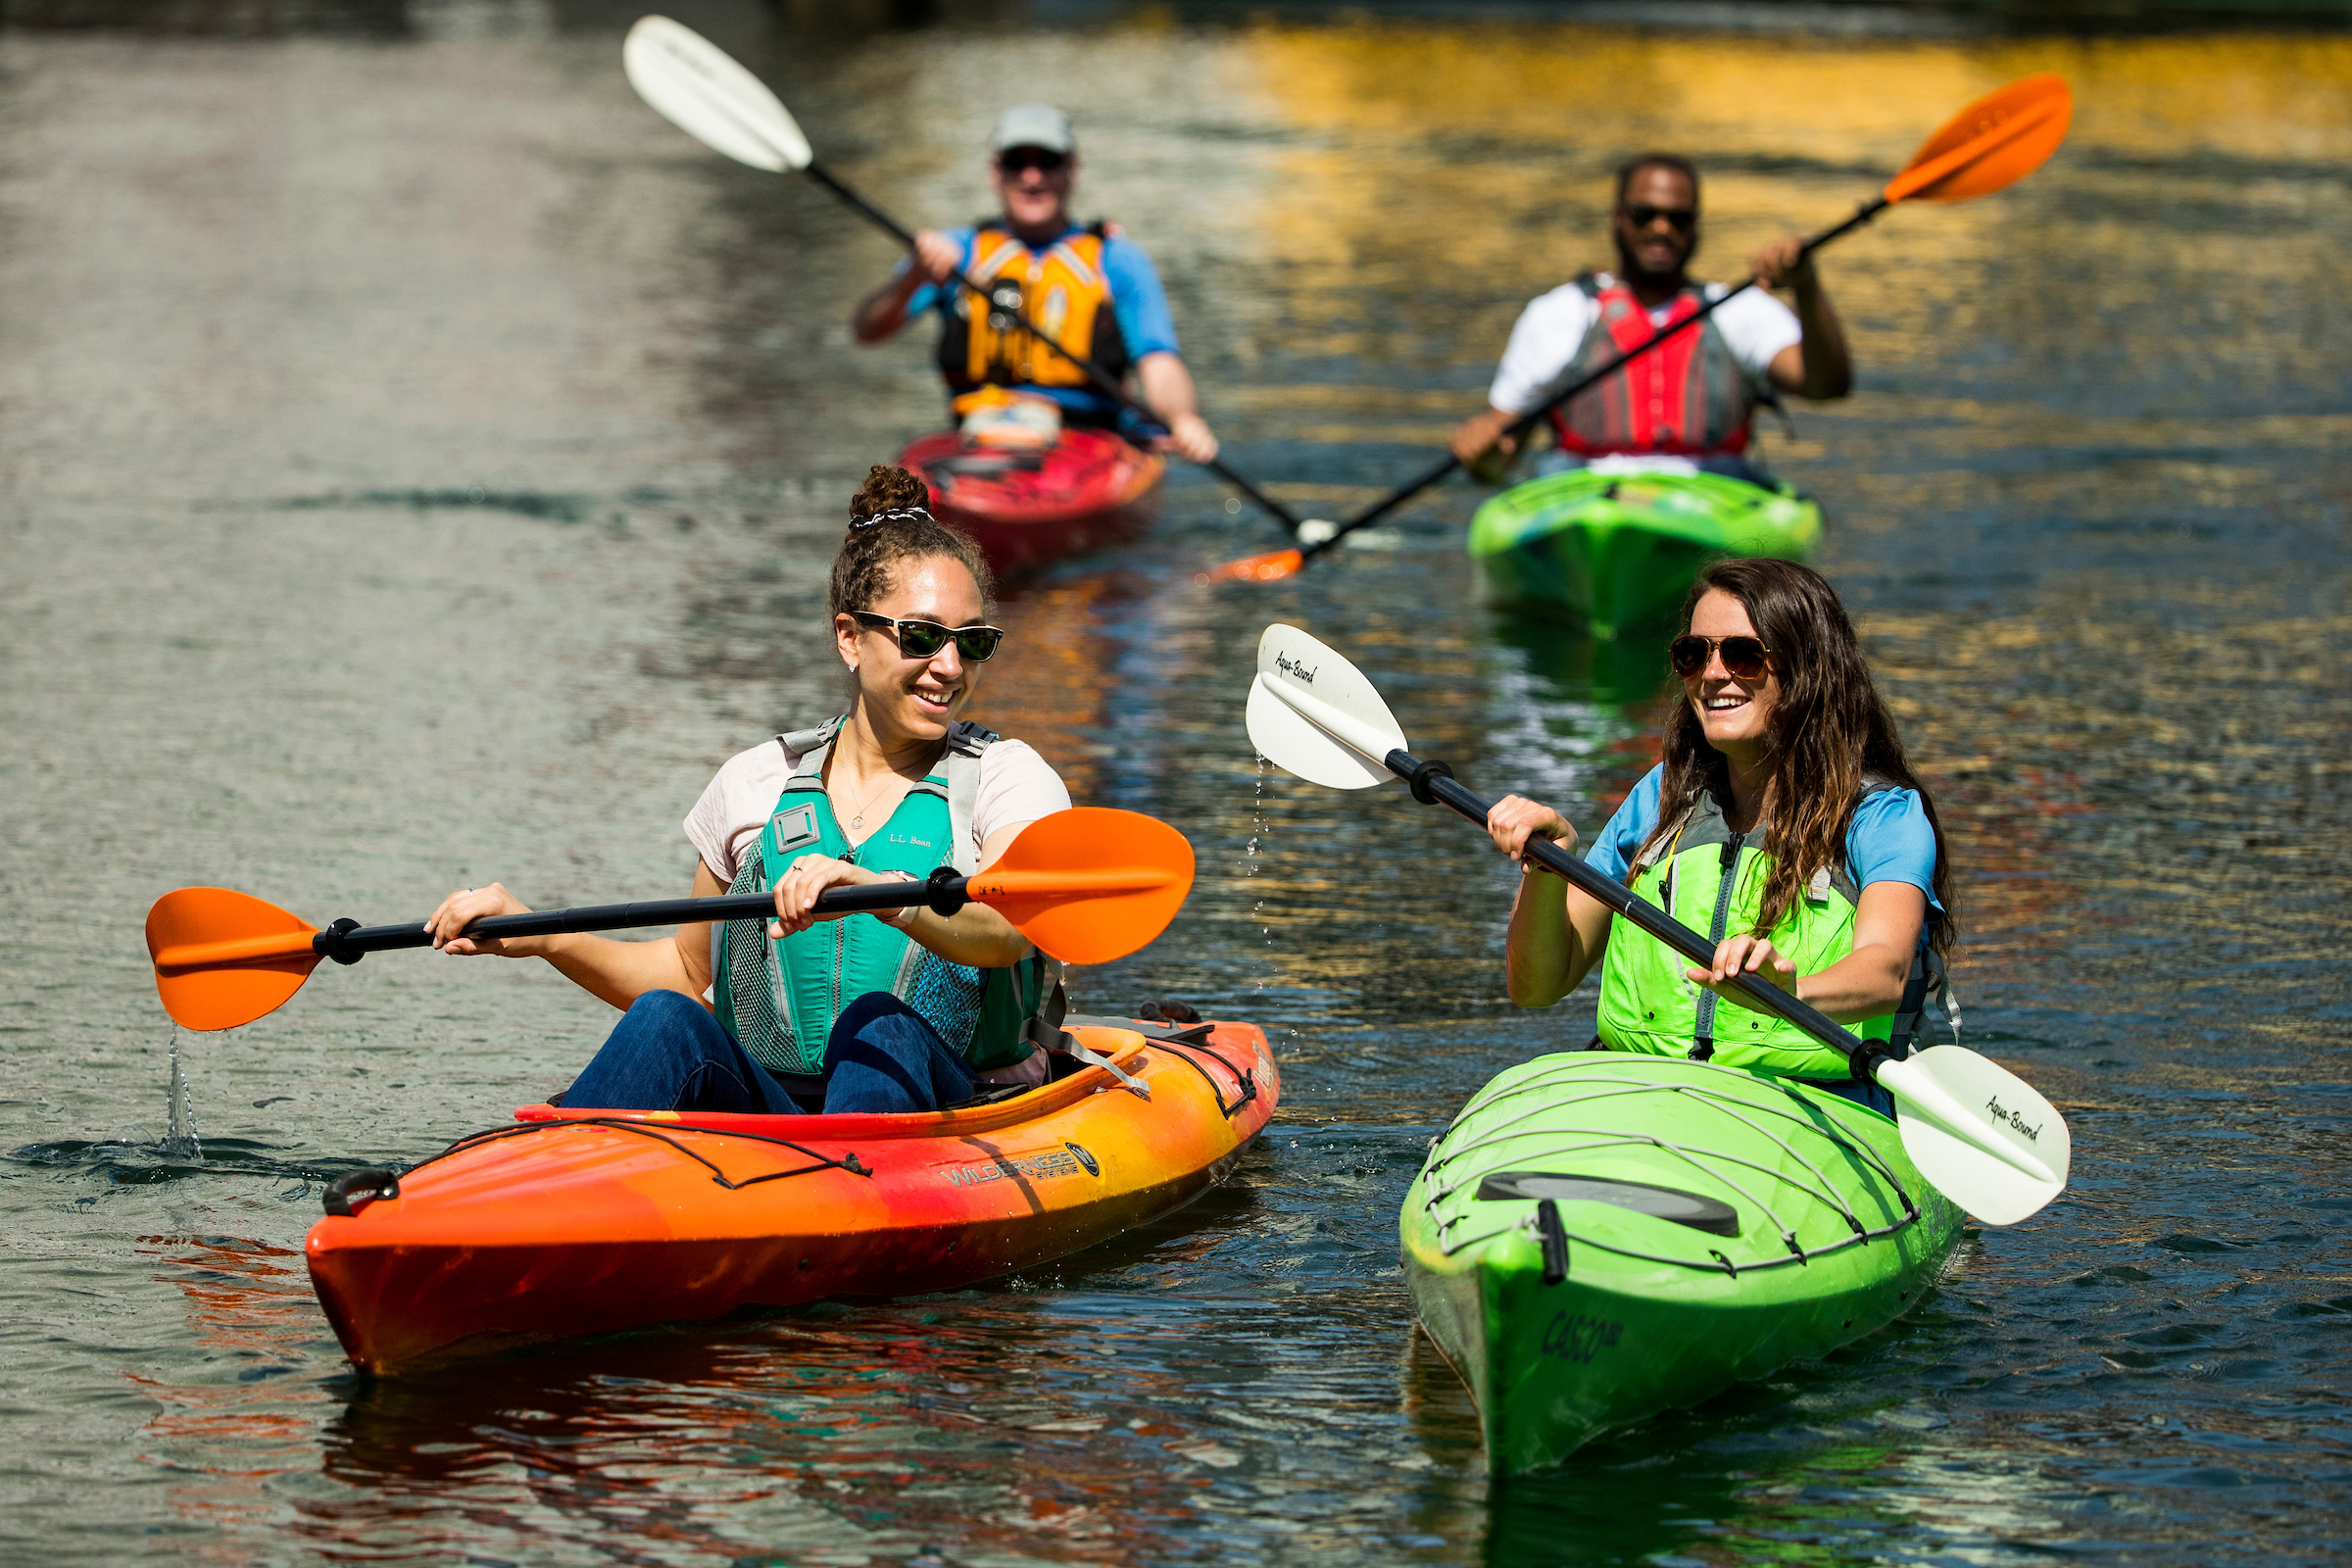 L.L.Bean Outdoor Discovery Programs provide people of all ages the chance to get out on the water in Boston this summer.